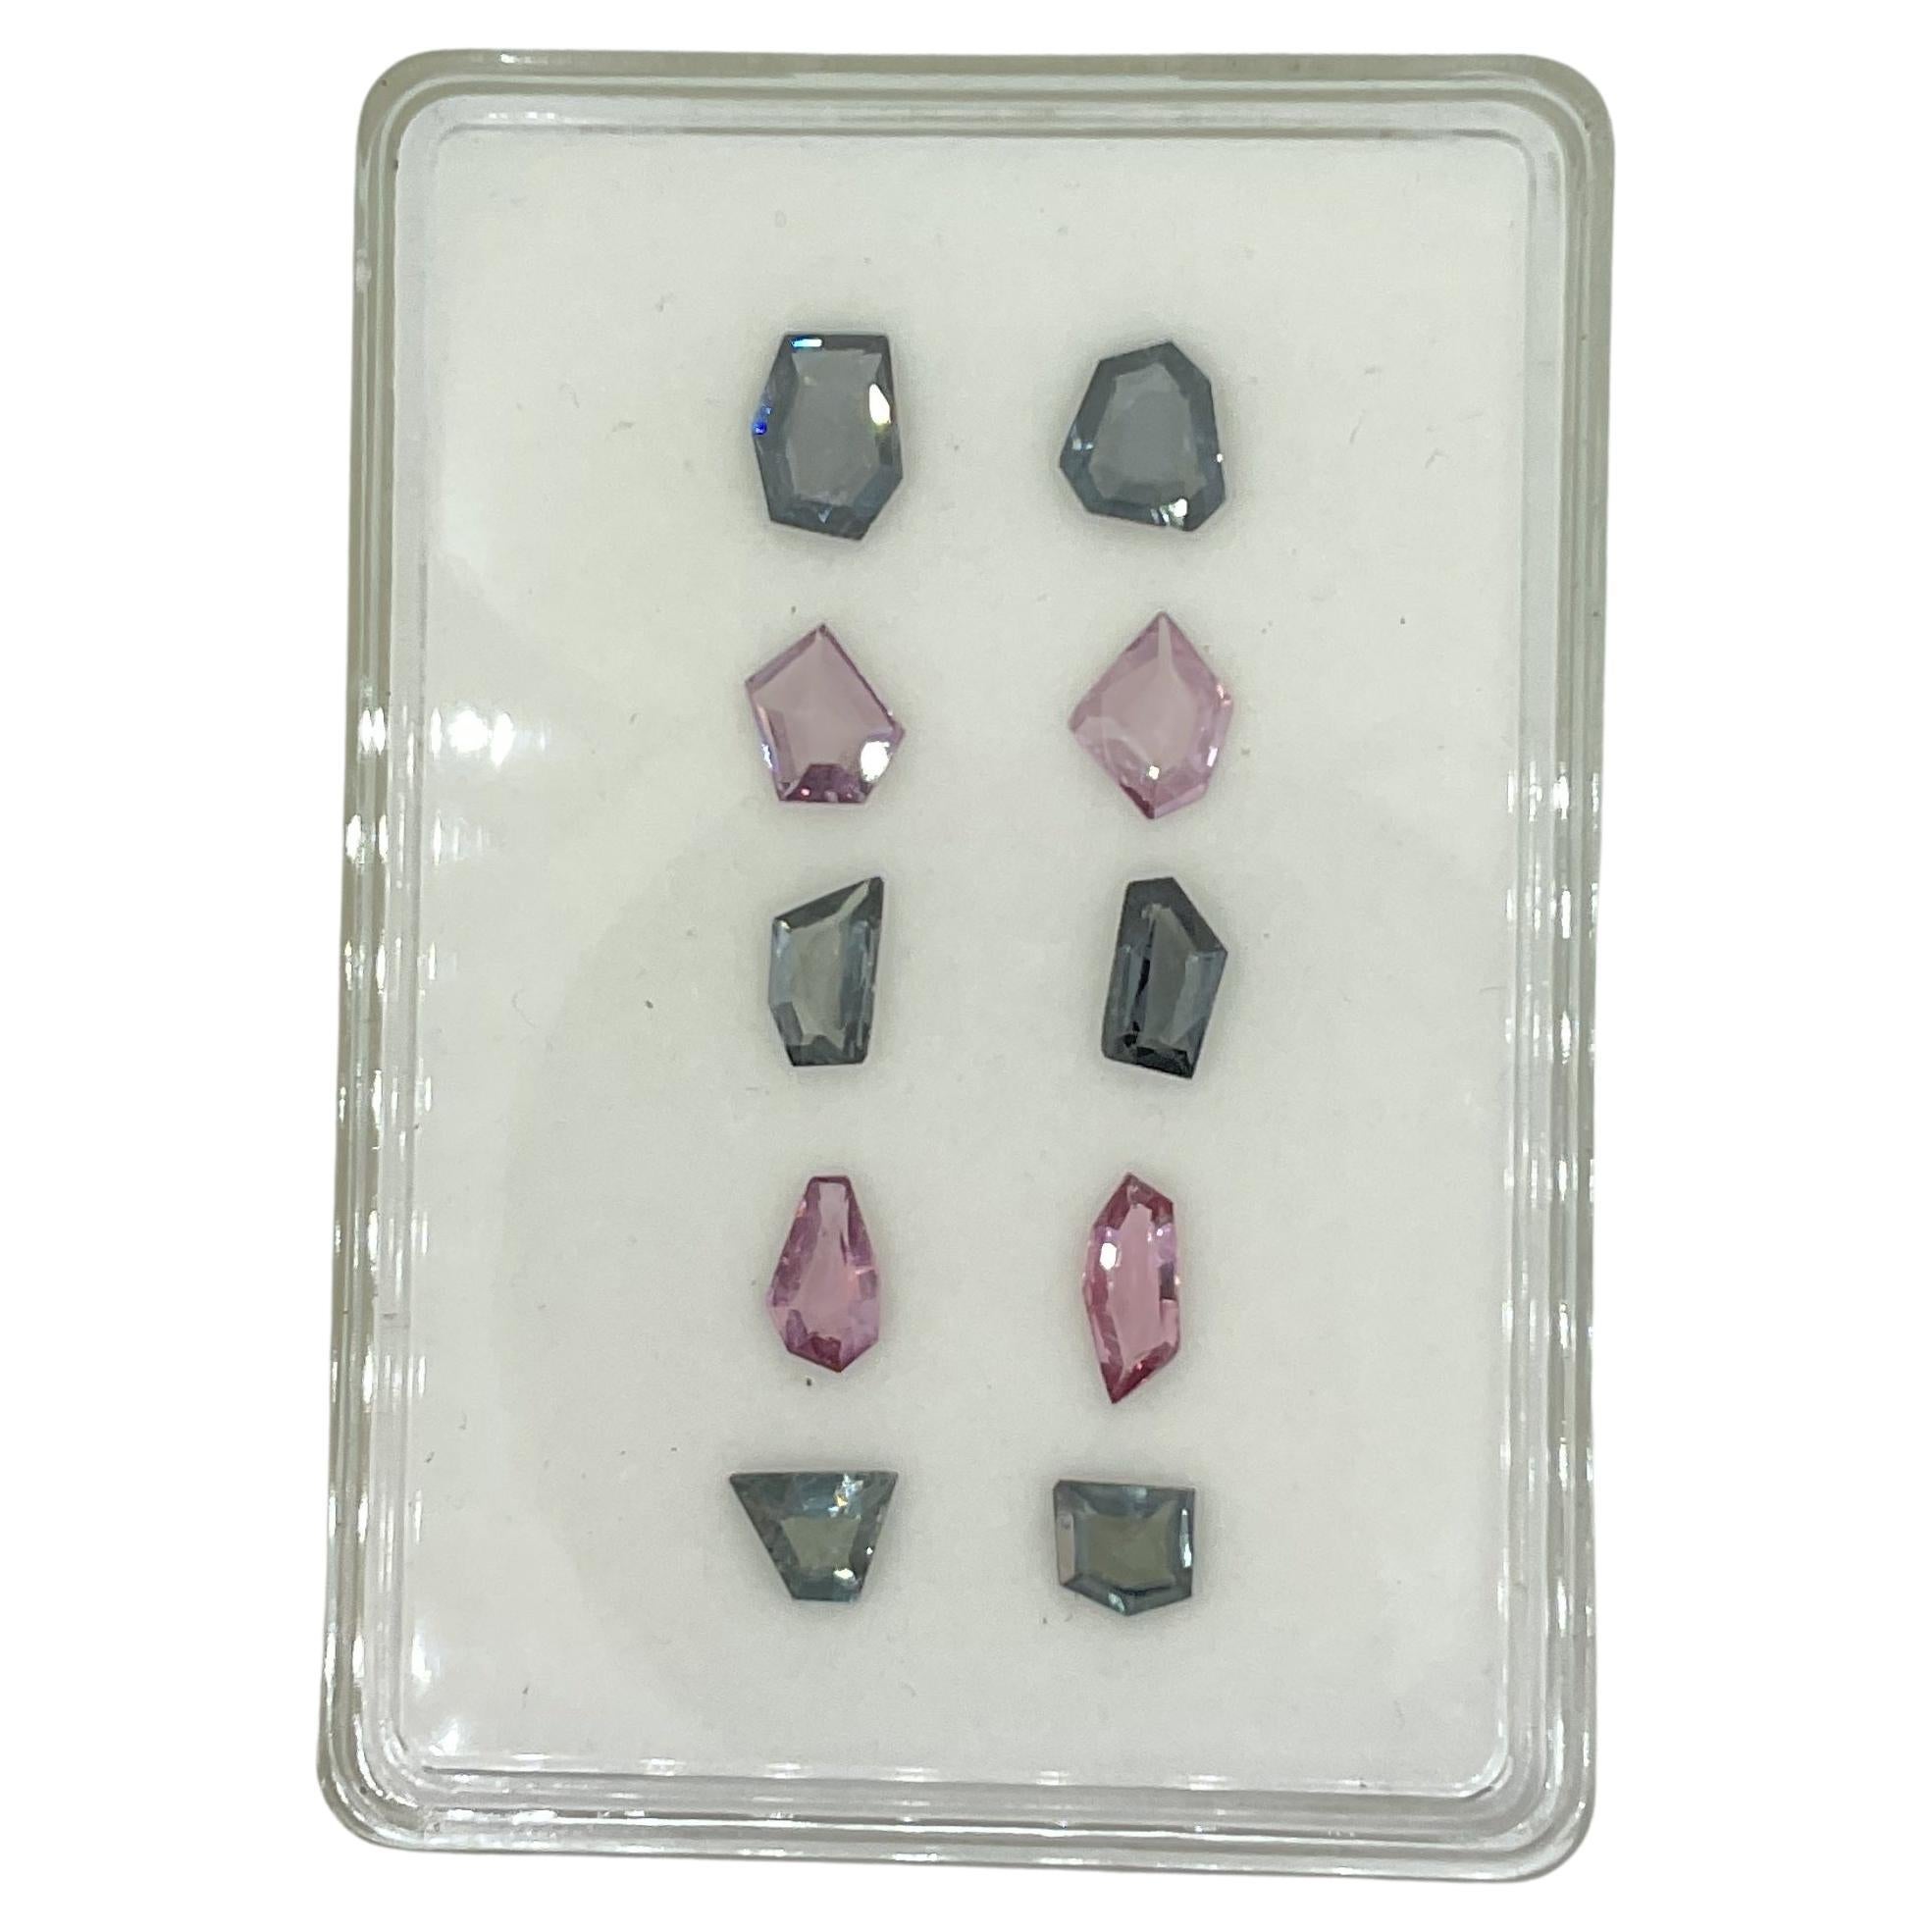 12.35 Carats Grey & Pink Spinel Fancy Cut Stone Natural Gem For Top Fine Jewelry